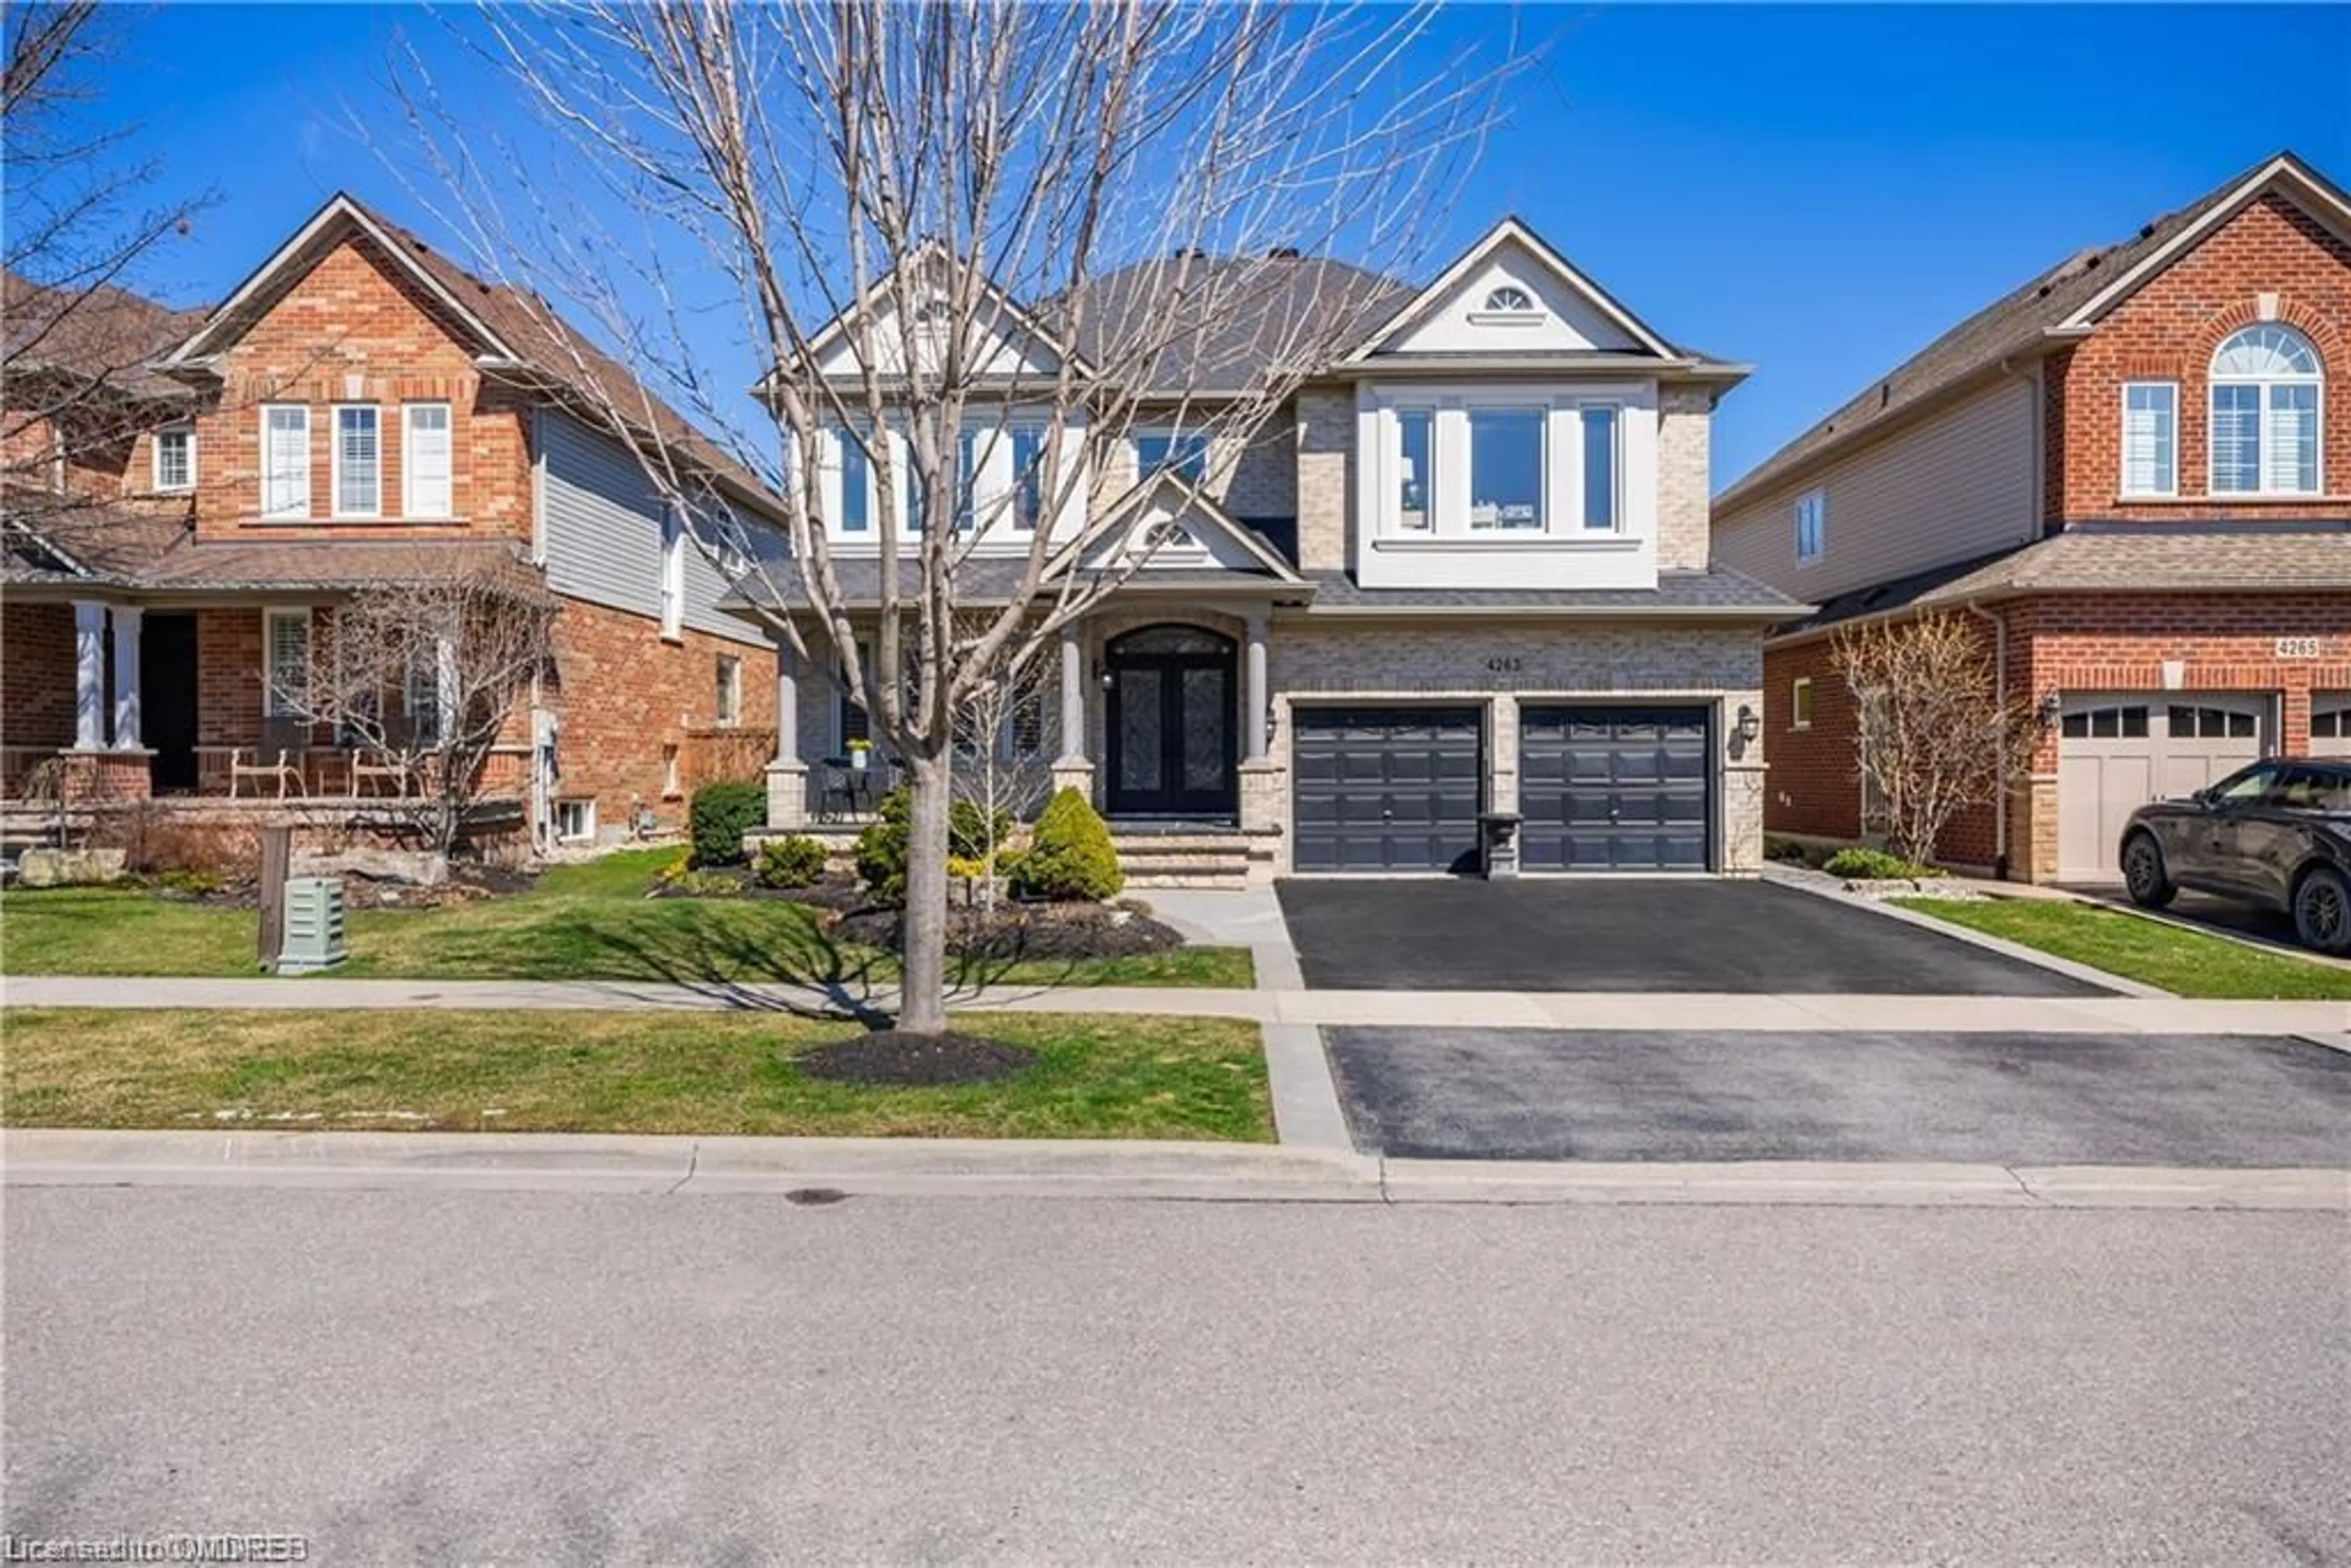 Frontside or backside of a home for 4263 Clubview Dr, Burlington Ontario L7M 4X2